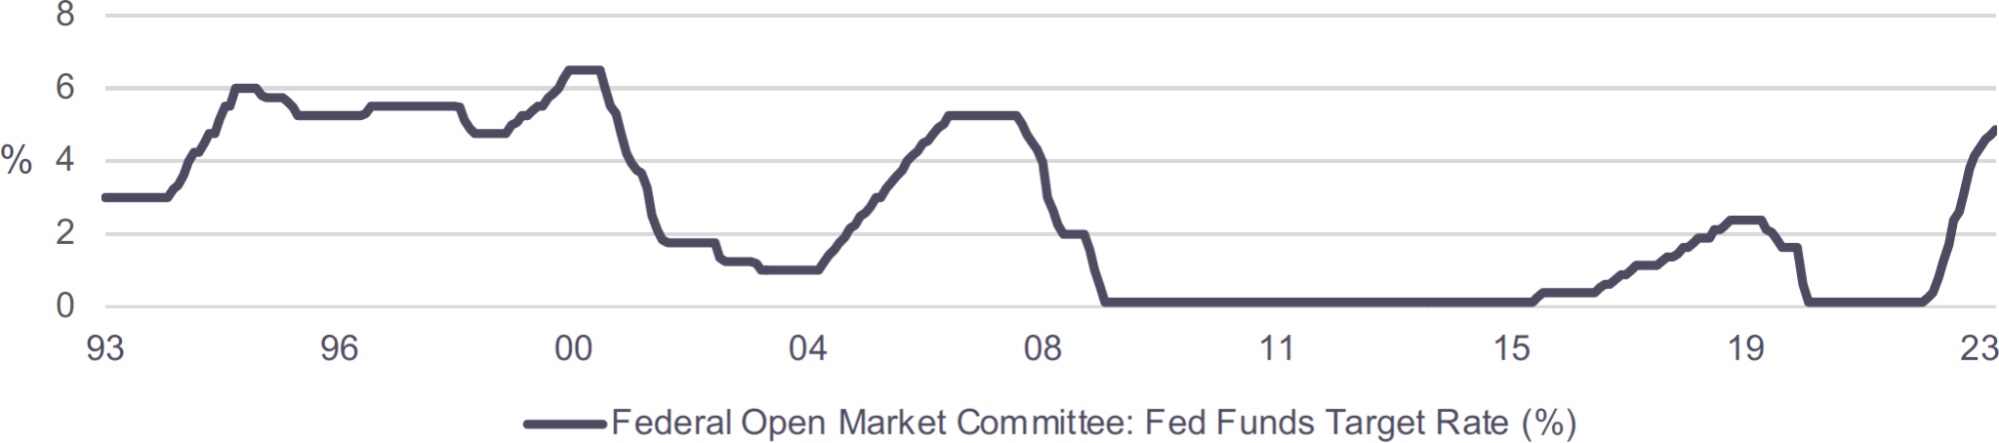 Line graph of fed funds target rates from 93-23